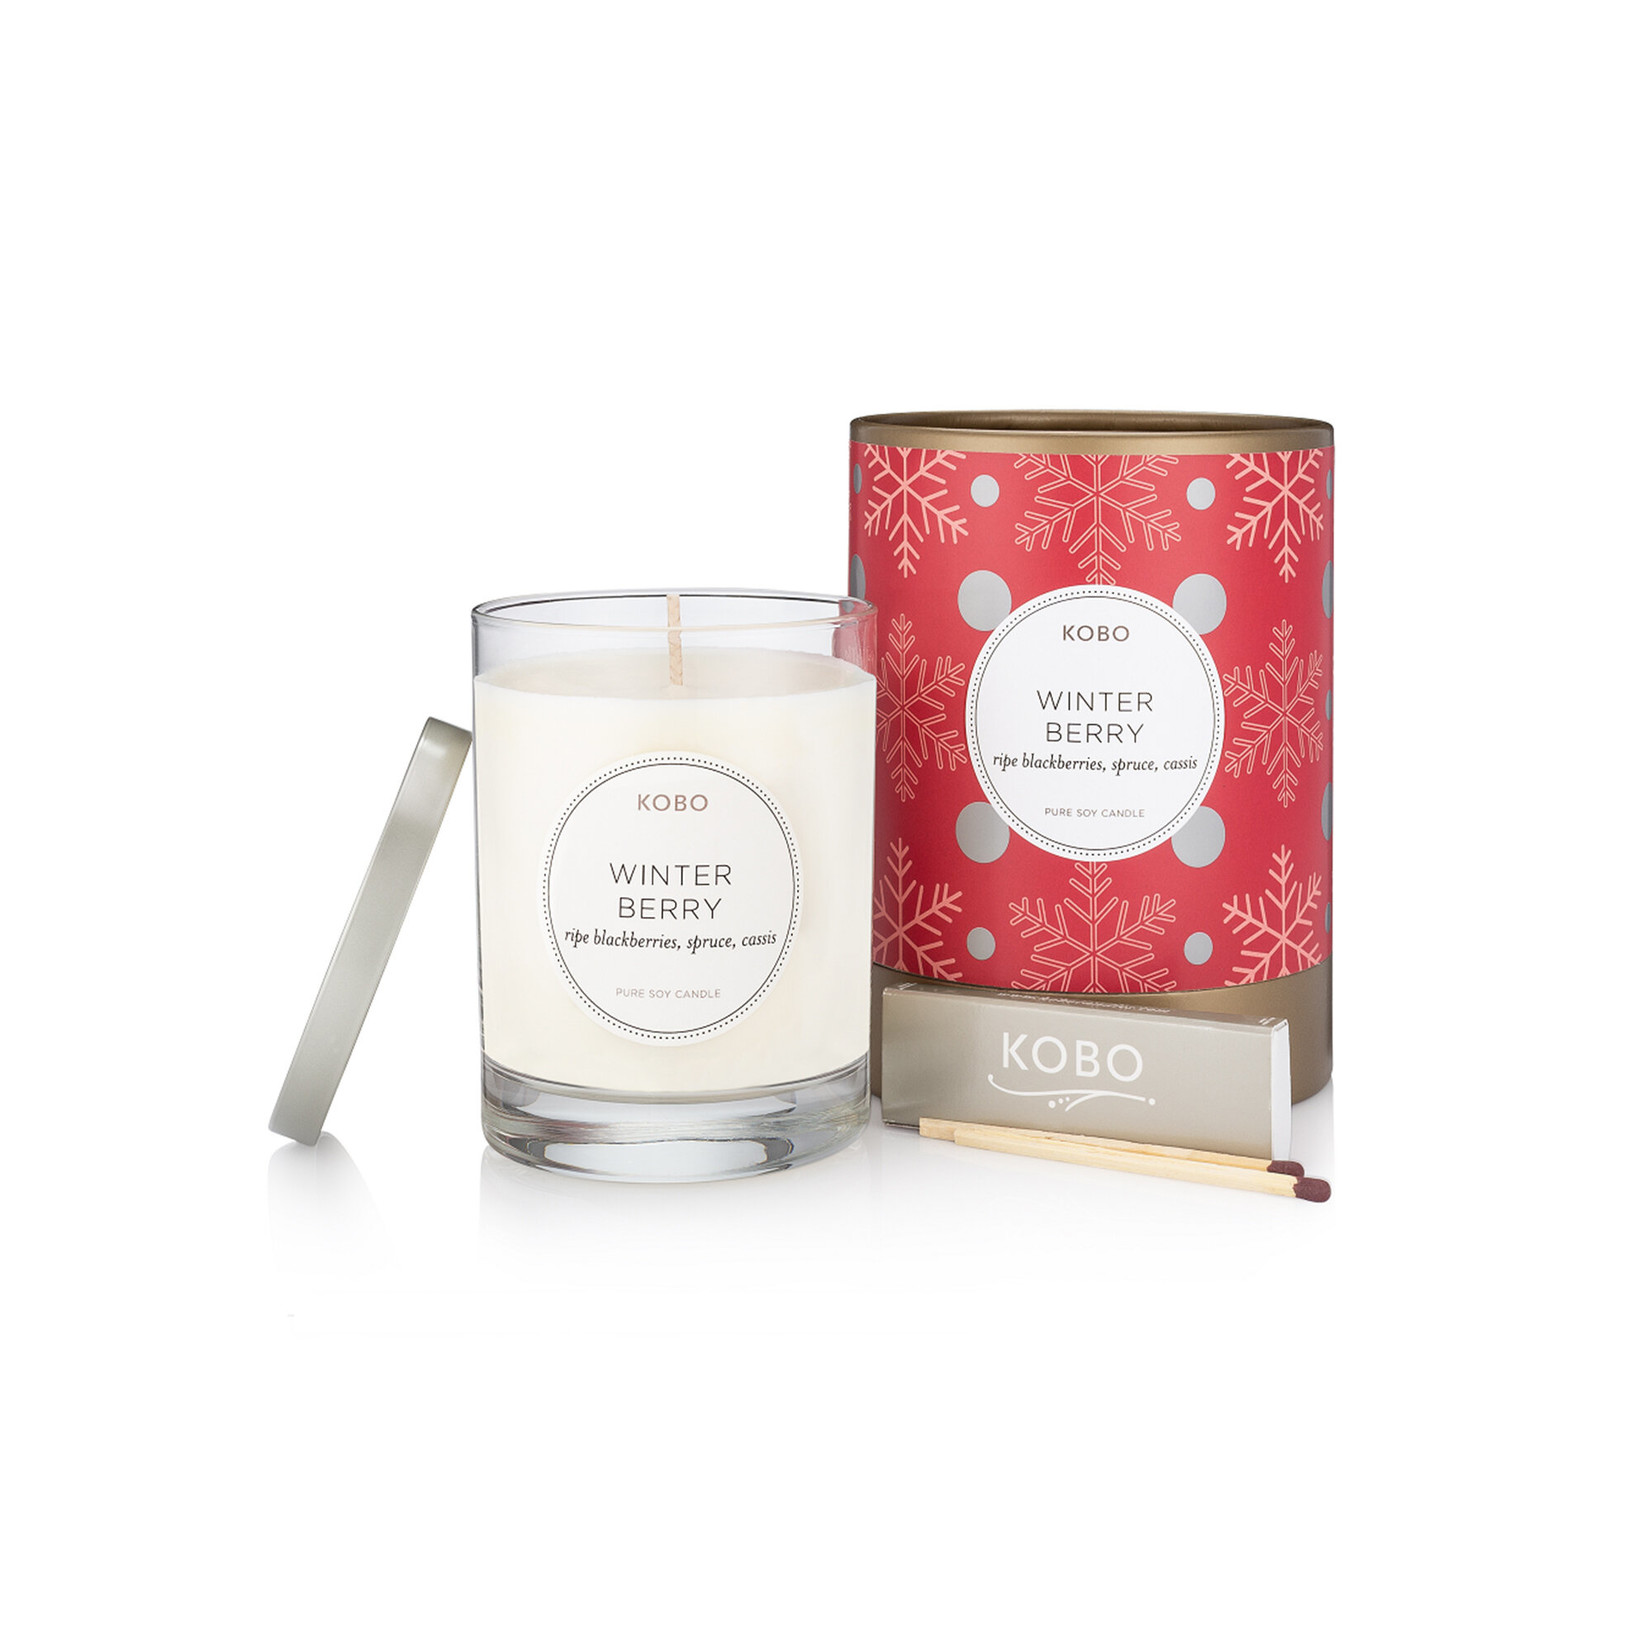 Kobo Winter Berry Candle